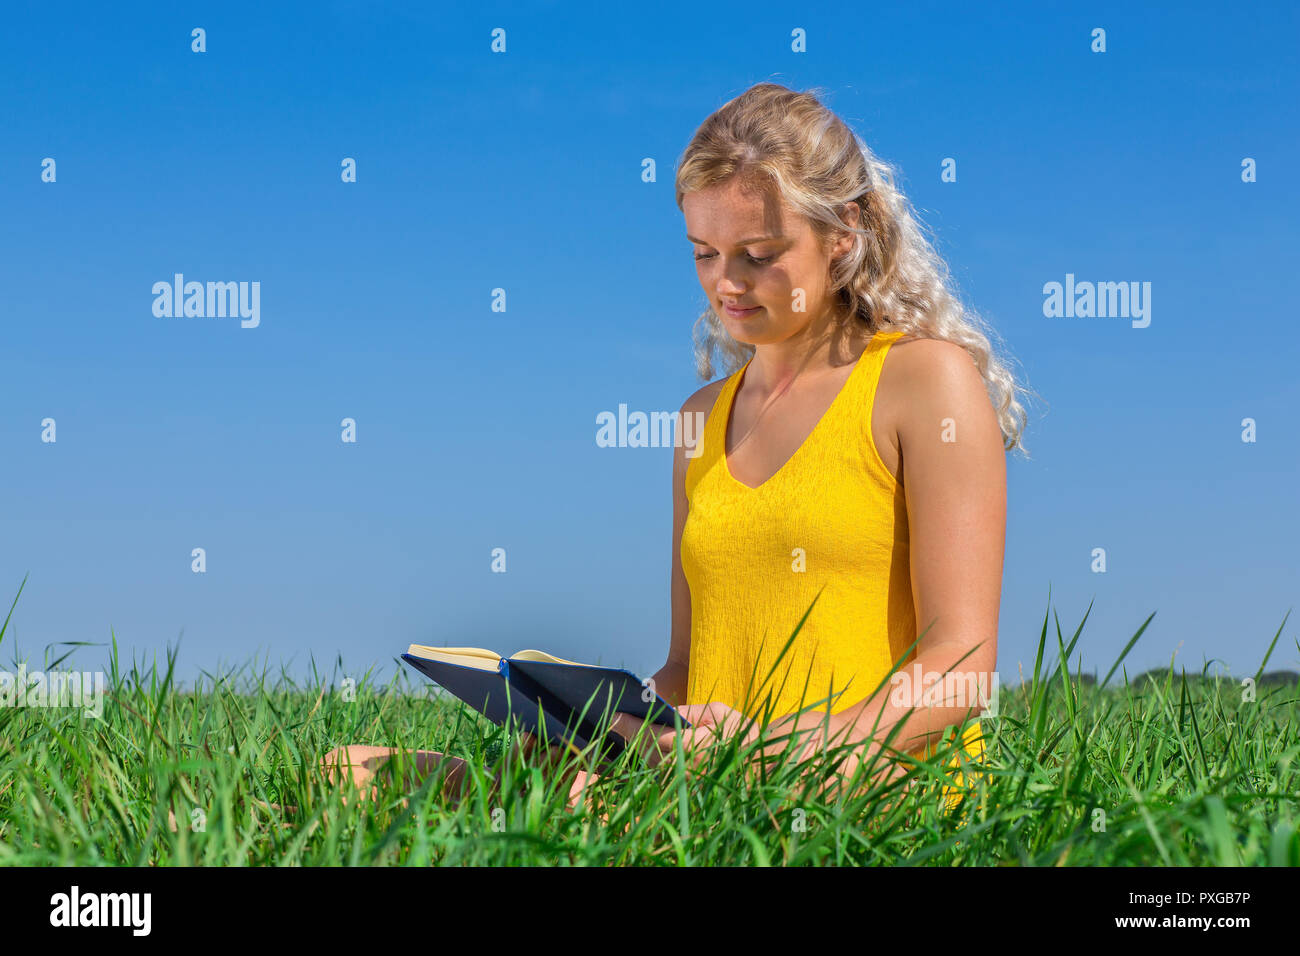 Young blond caucasian woman reading book in grass with blue sky Stock Photo